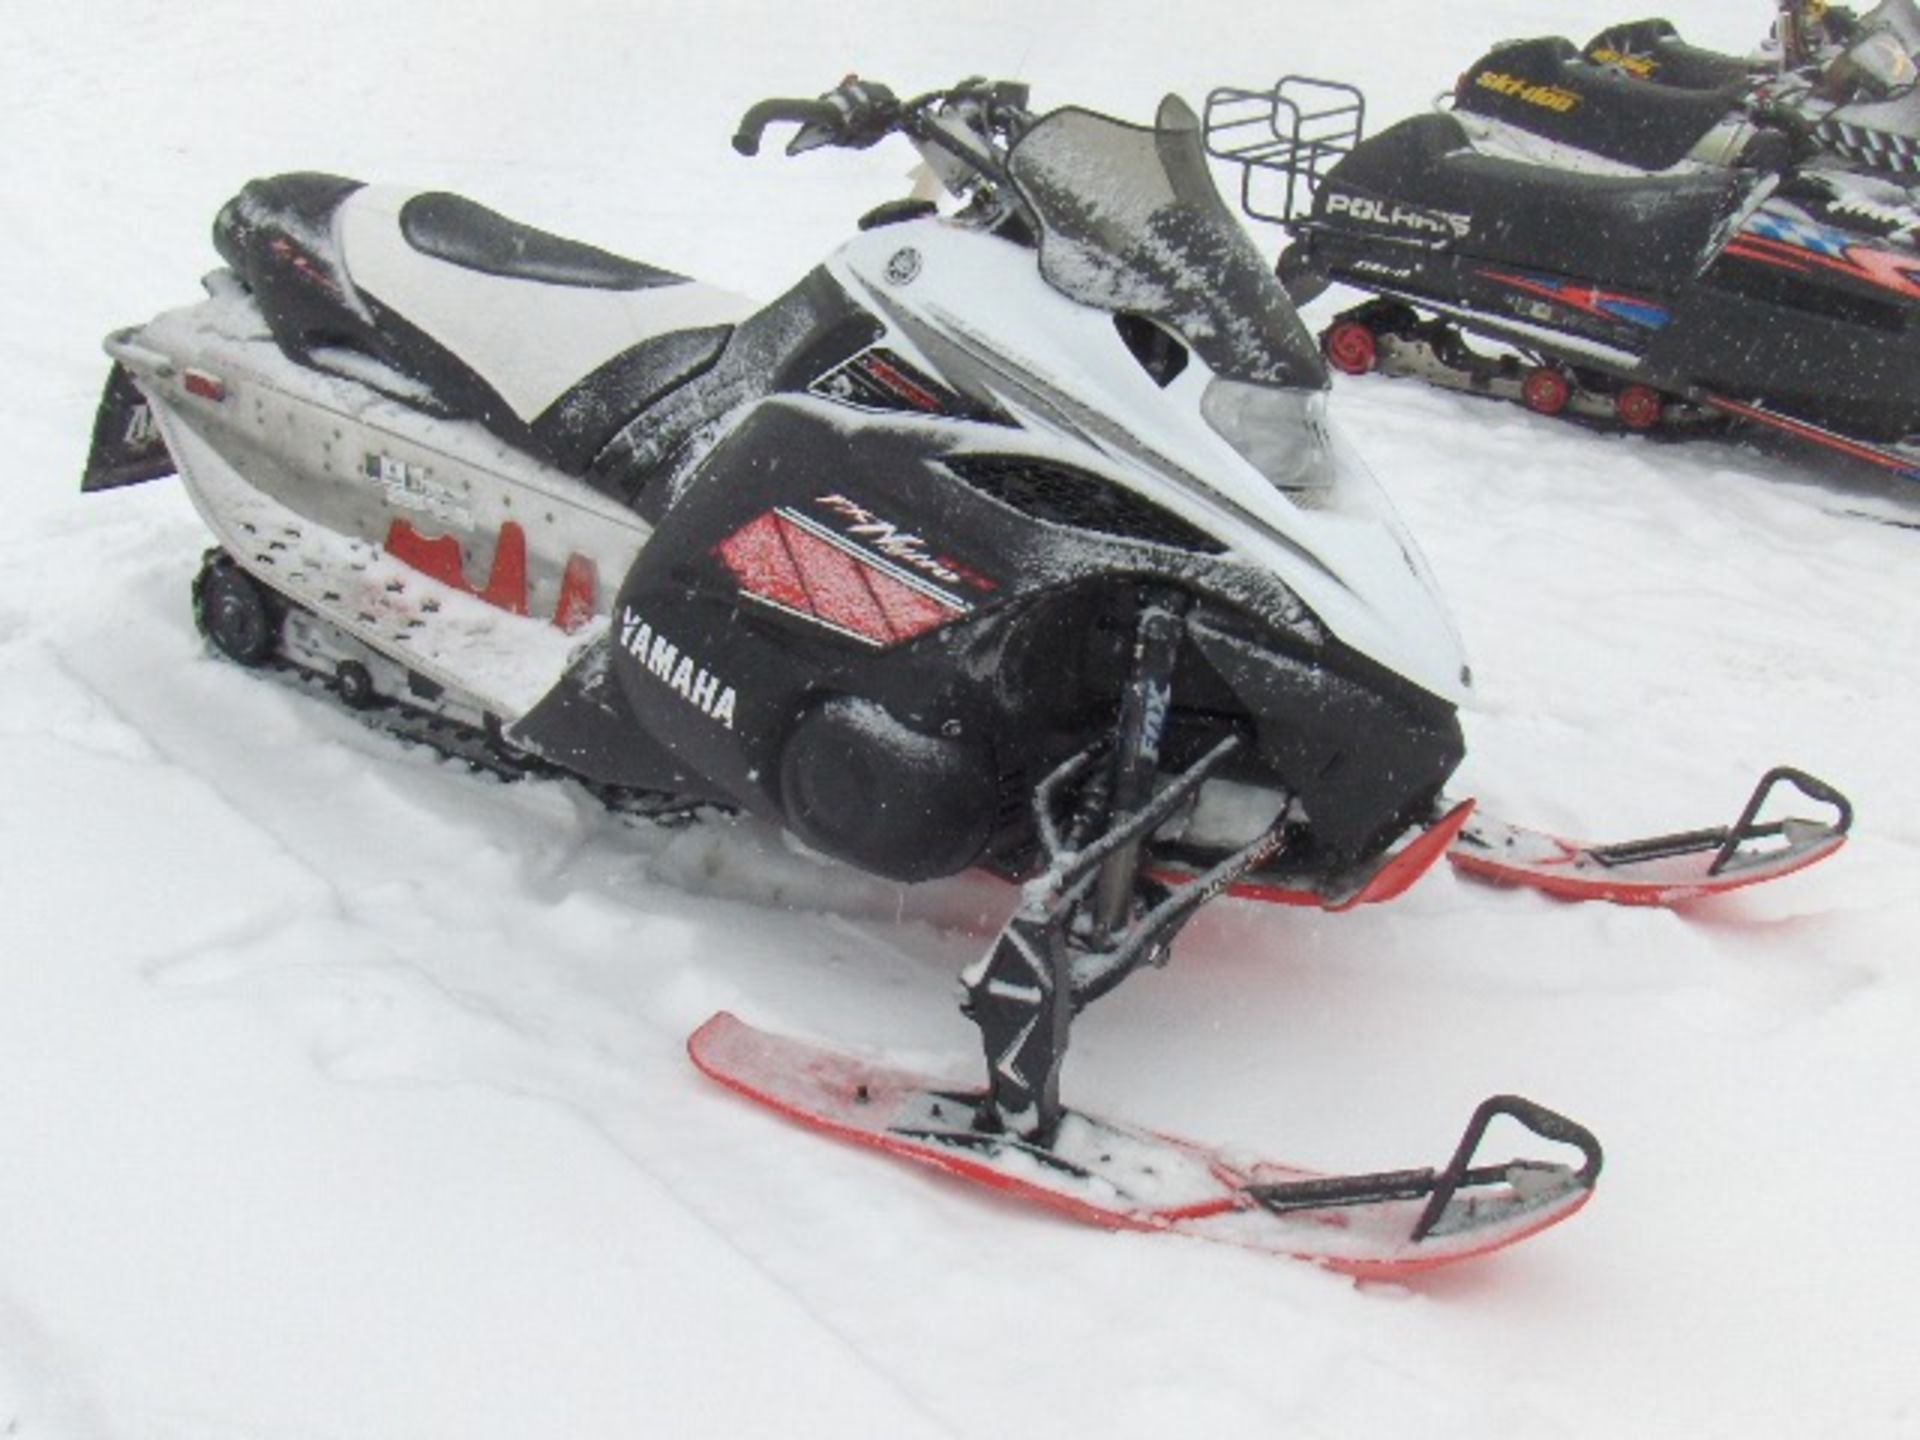 2008 YAMAHA 1049 FX NYTRO R TX  JYE8HB0088A002134 snowmobile, owner started at time of auction check - Image 2 of 4